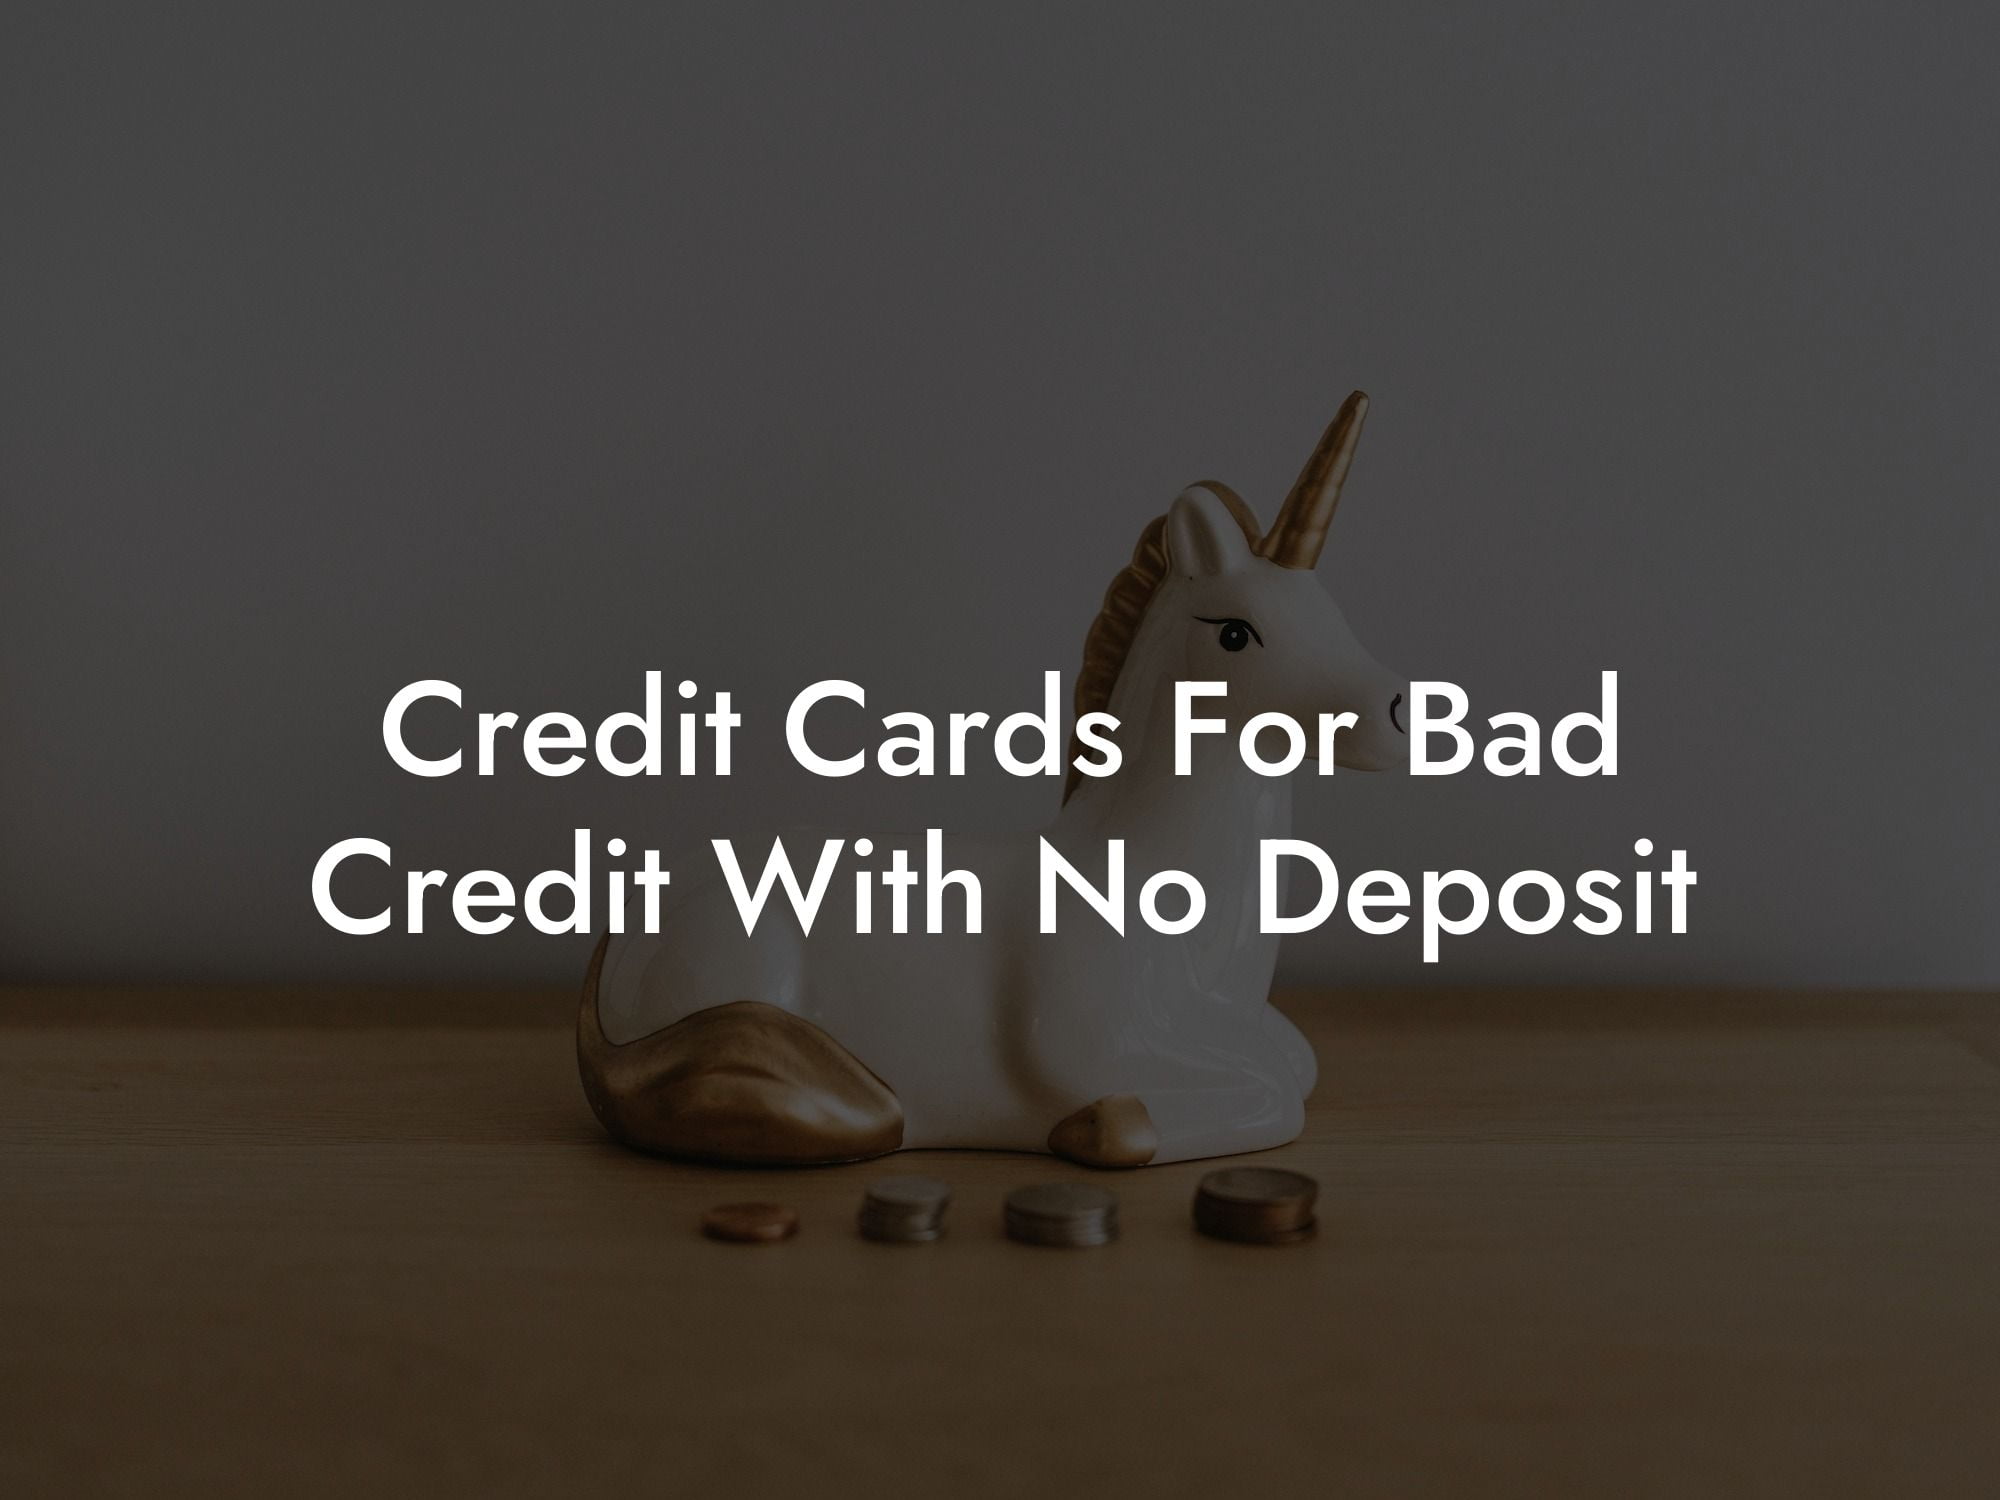 Credit Cards For Bad Credit With No Deposit